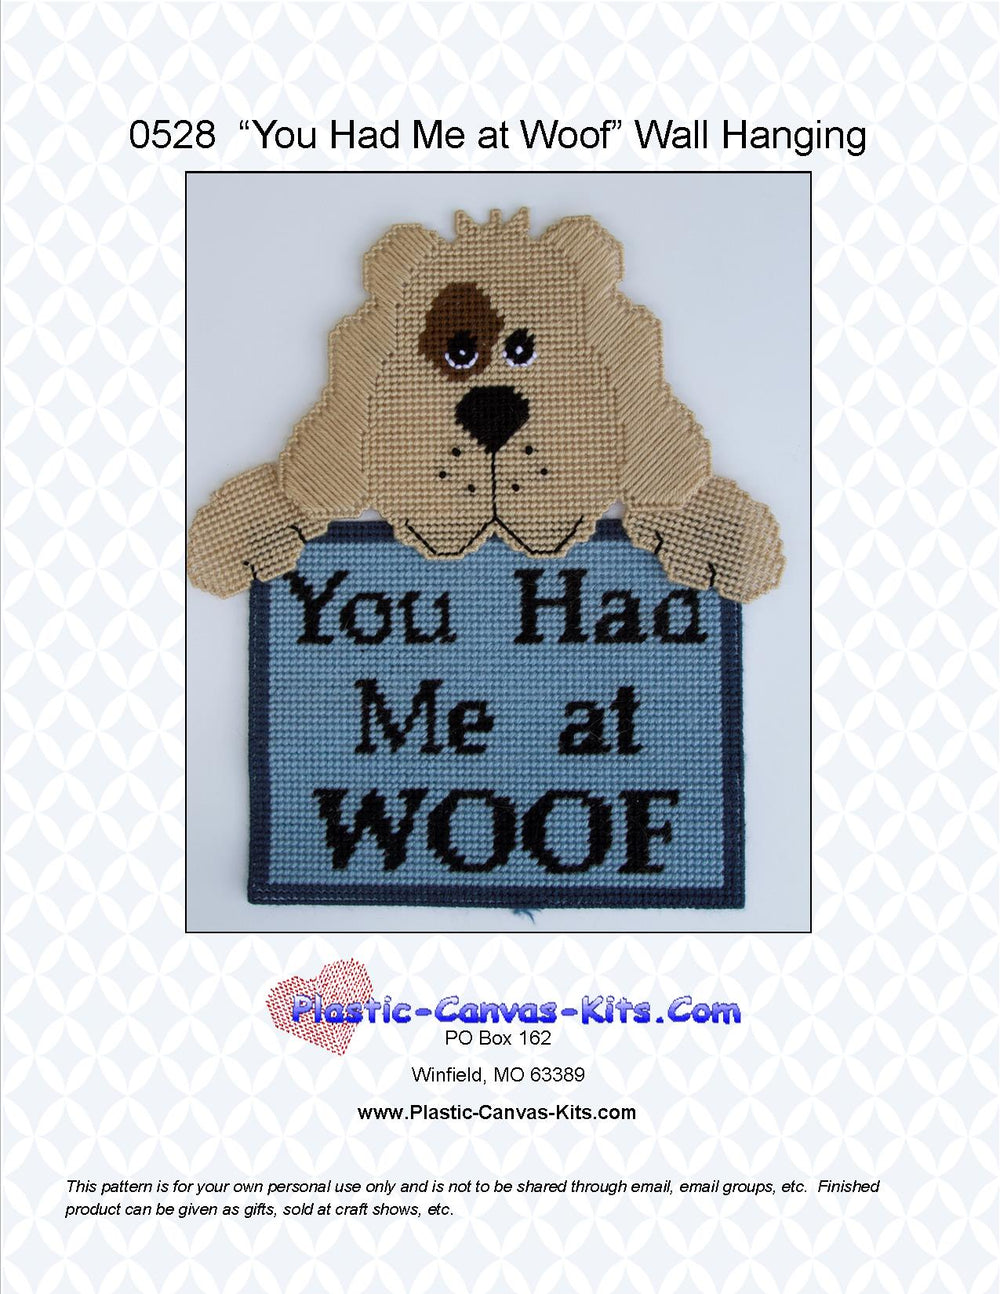 You Had me at Woof Dog Wall Hanging